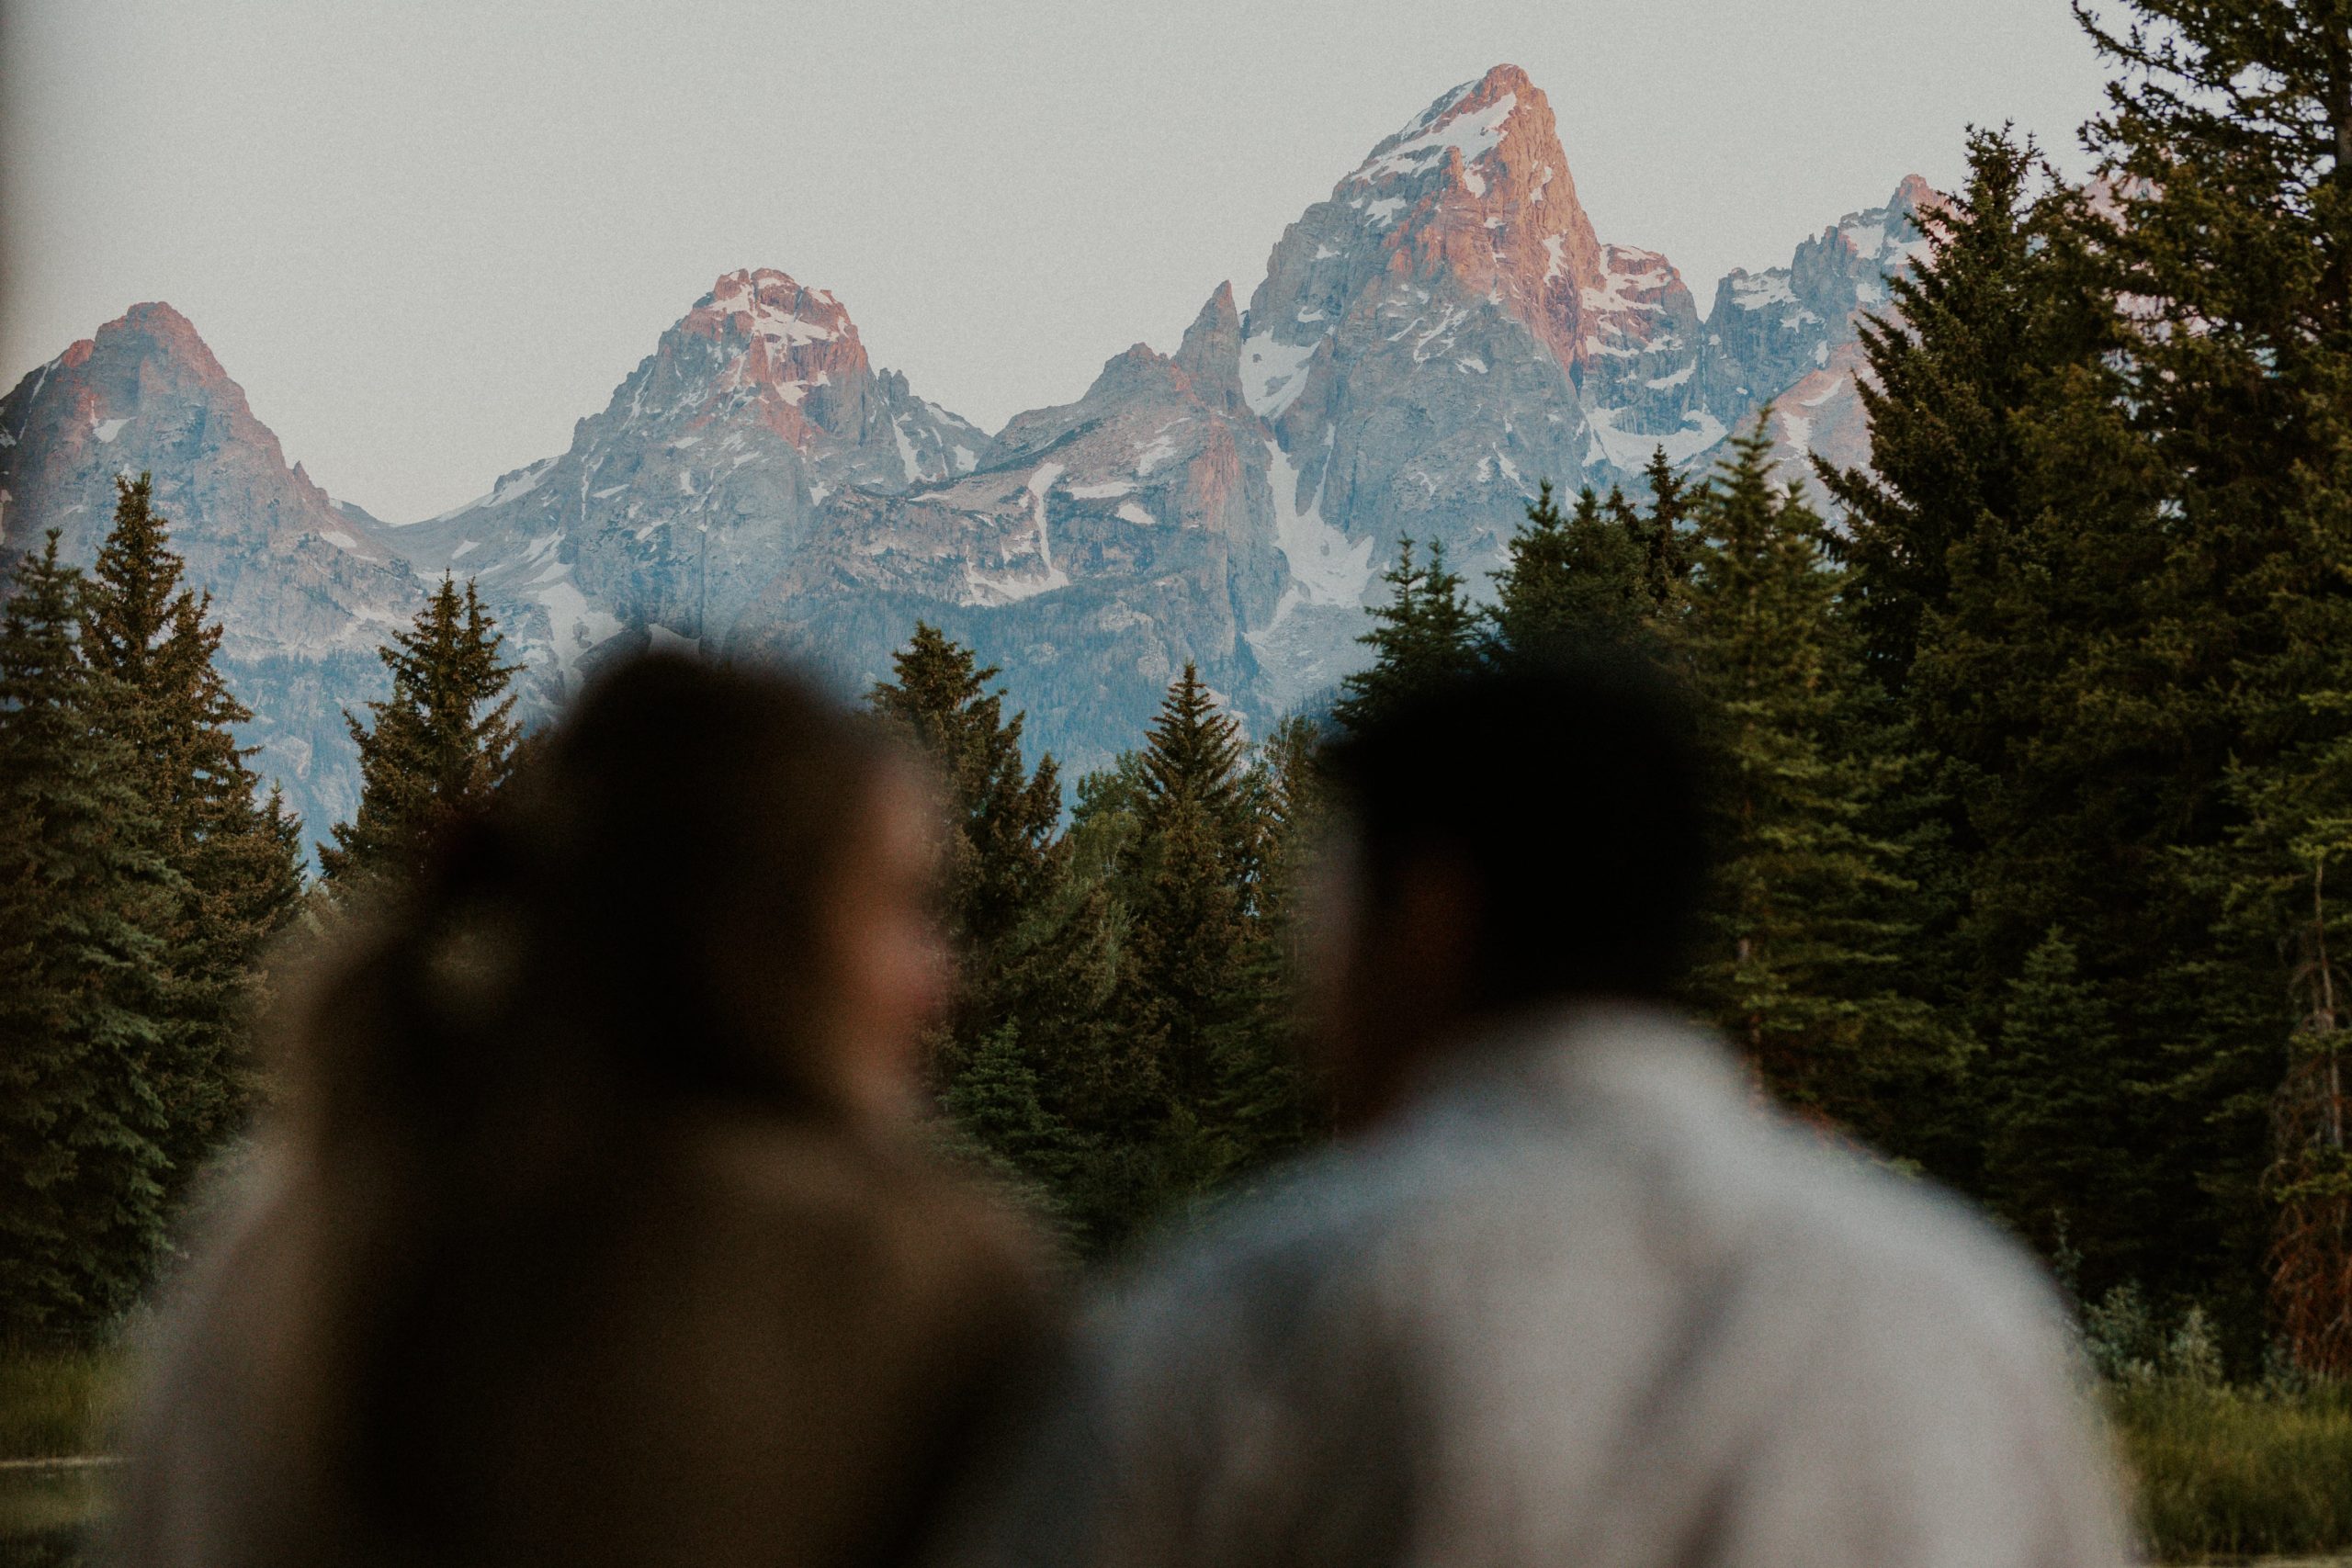 Engagement photos at sunrise at Schwabacher Landing in the Grand Teton National Park.